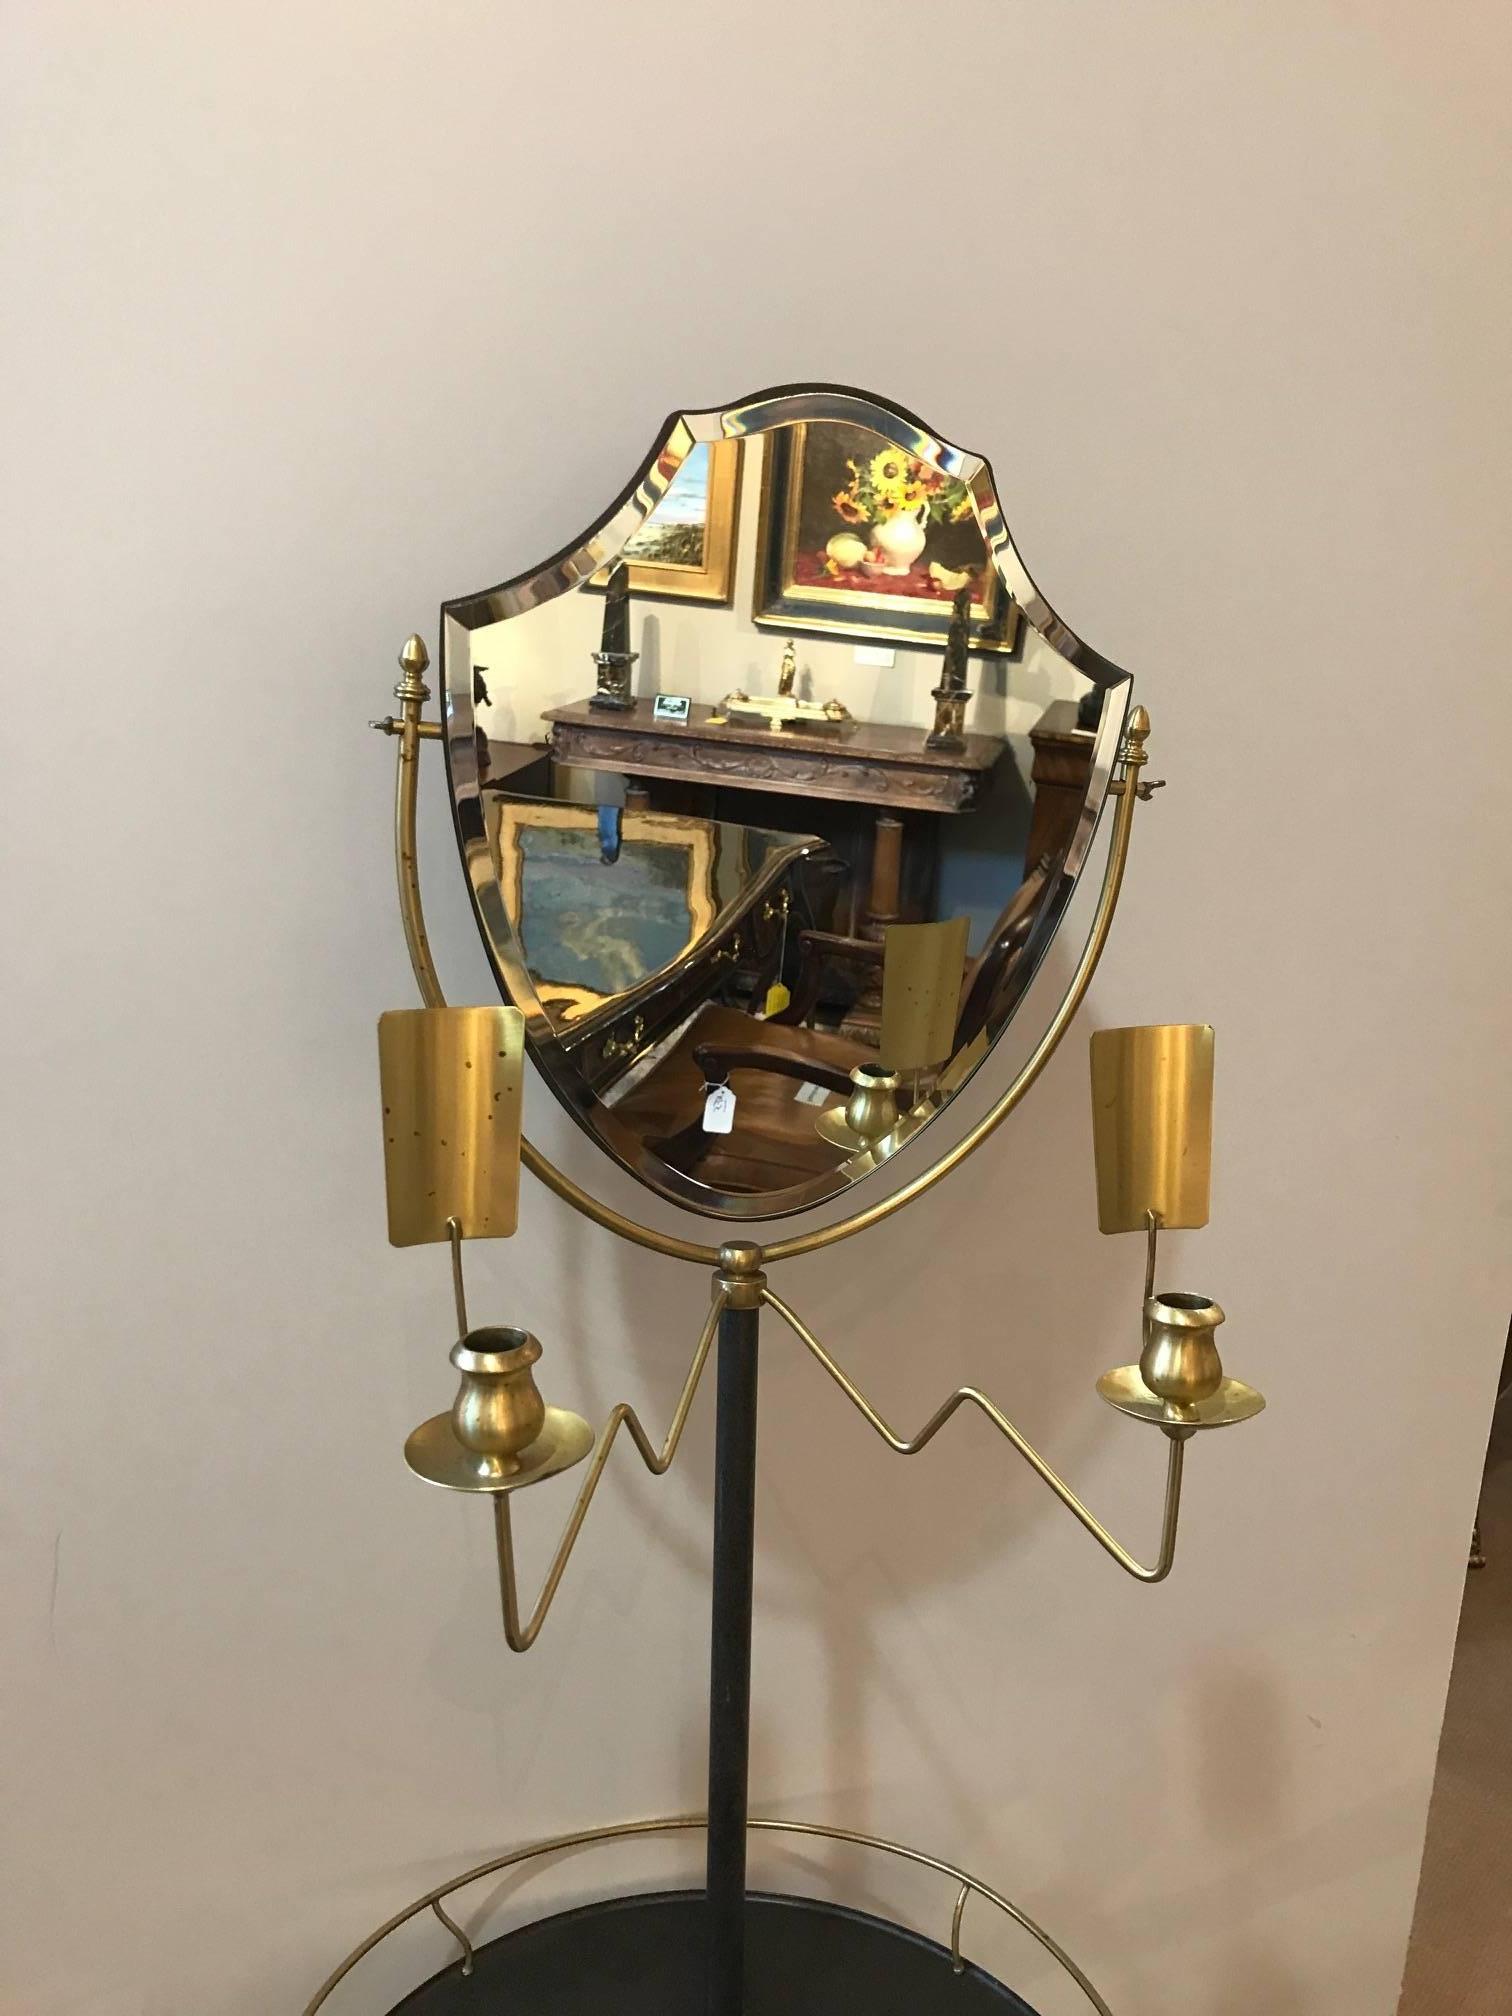 Elegant brass and galvanized metal standing shaving or dressing mirror. The Classic shield shaped mirror flanked by a candleholder with reflector. The center with a gallery edge table resting on a tripod base.